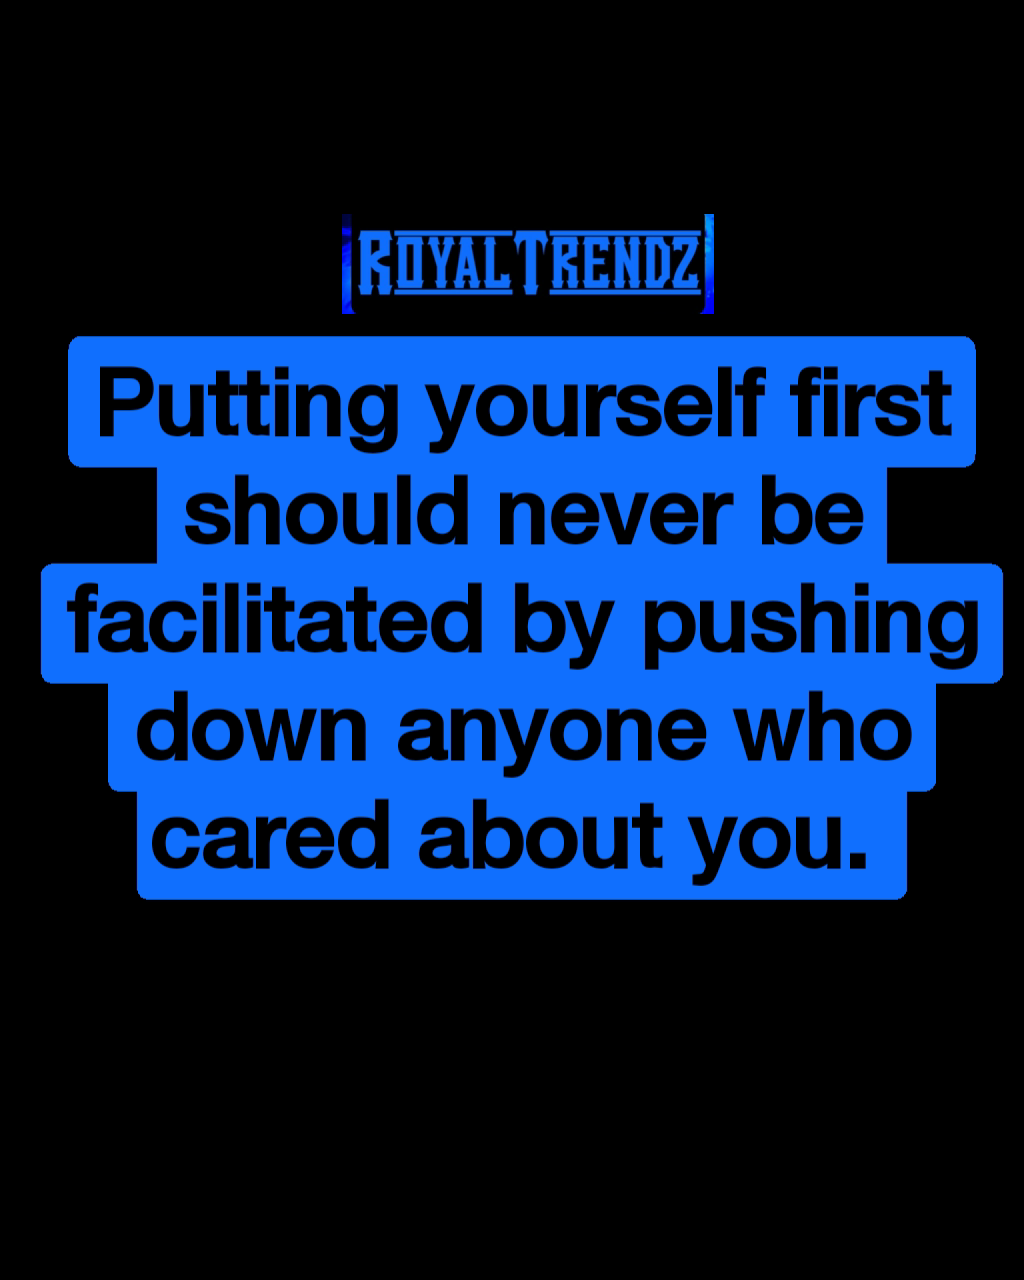 Putting yourself first should never be facilitated by pushing down anyone who cared about you. 